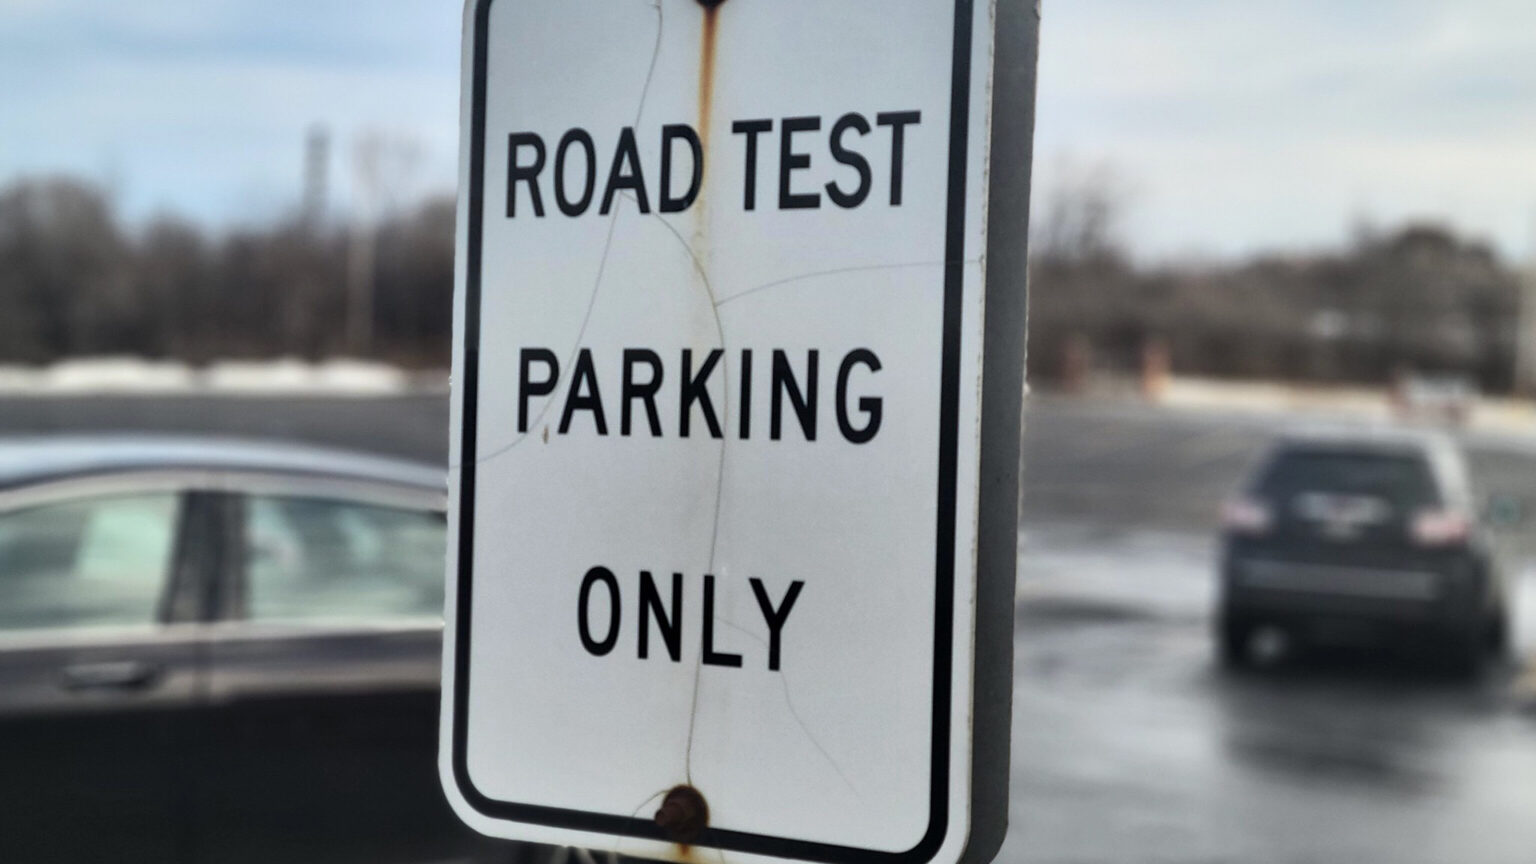 A sign in a parking lot reads Road Test Parking Only.